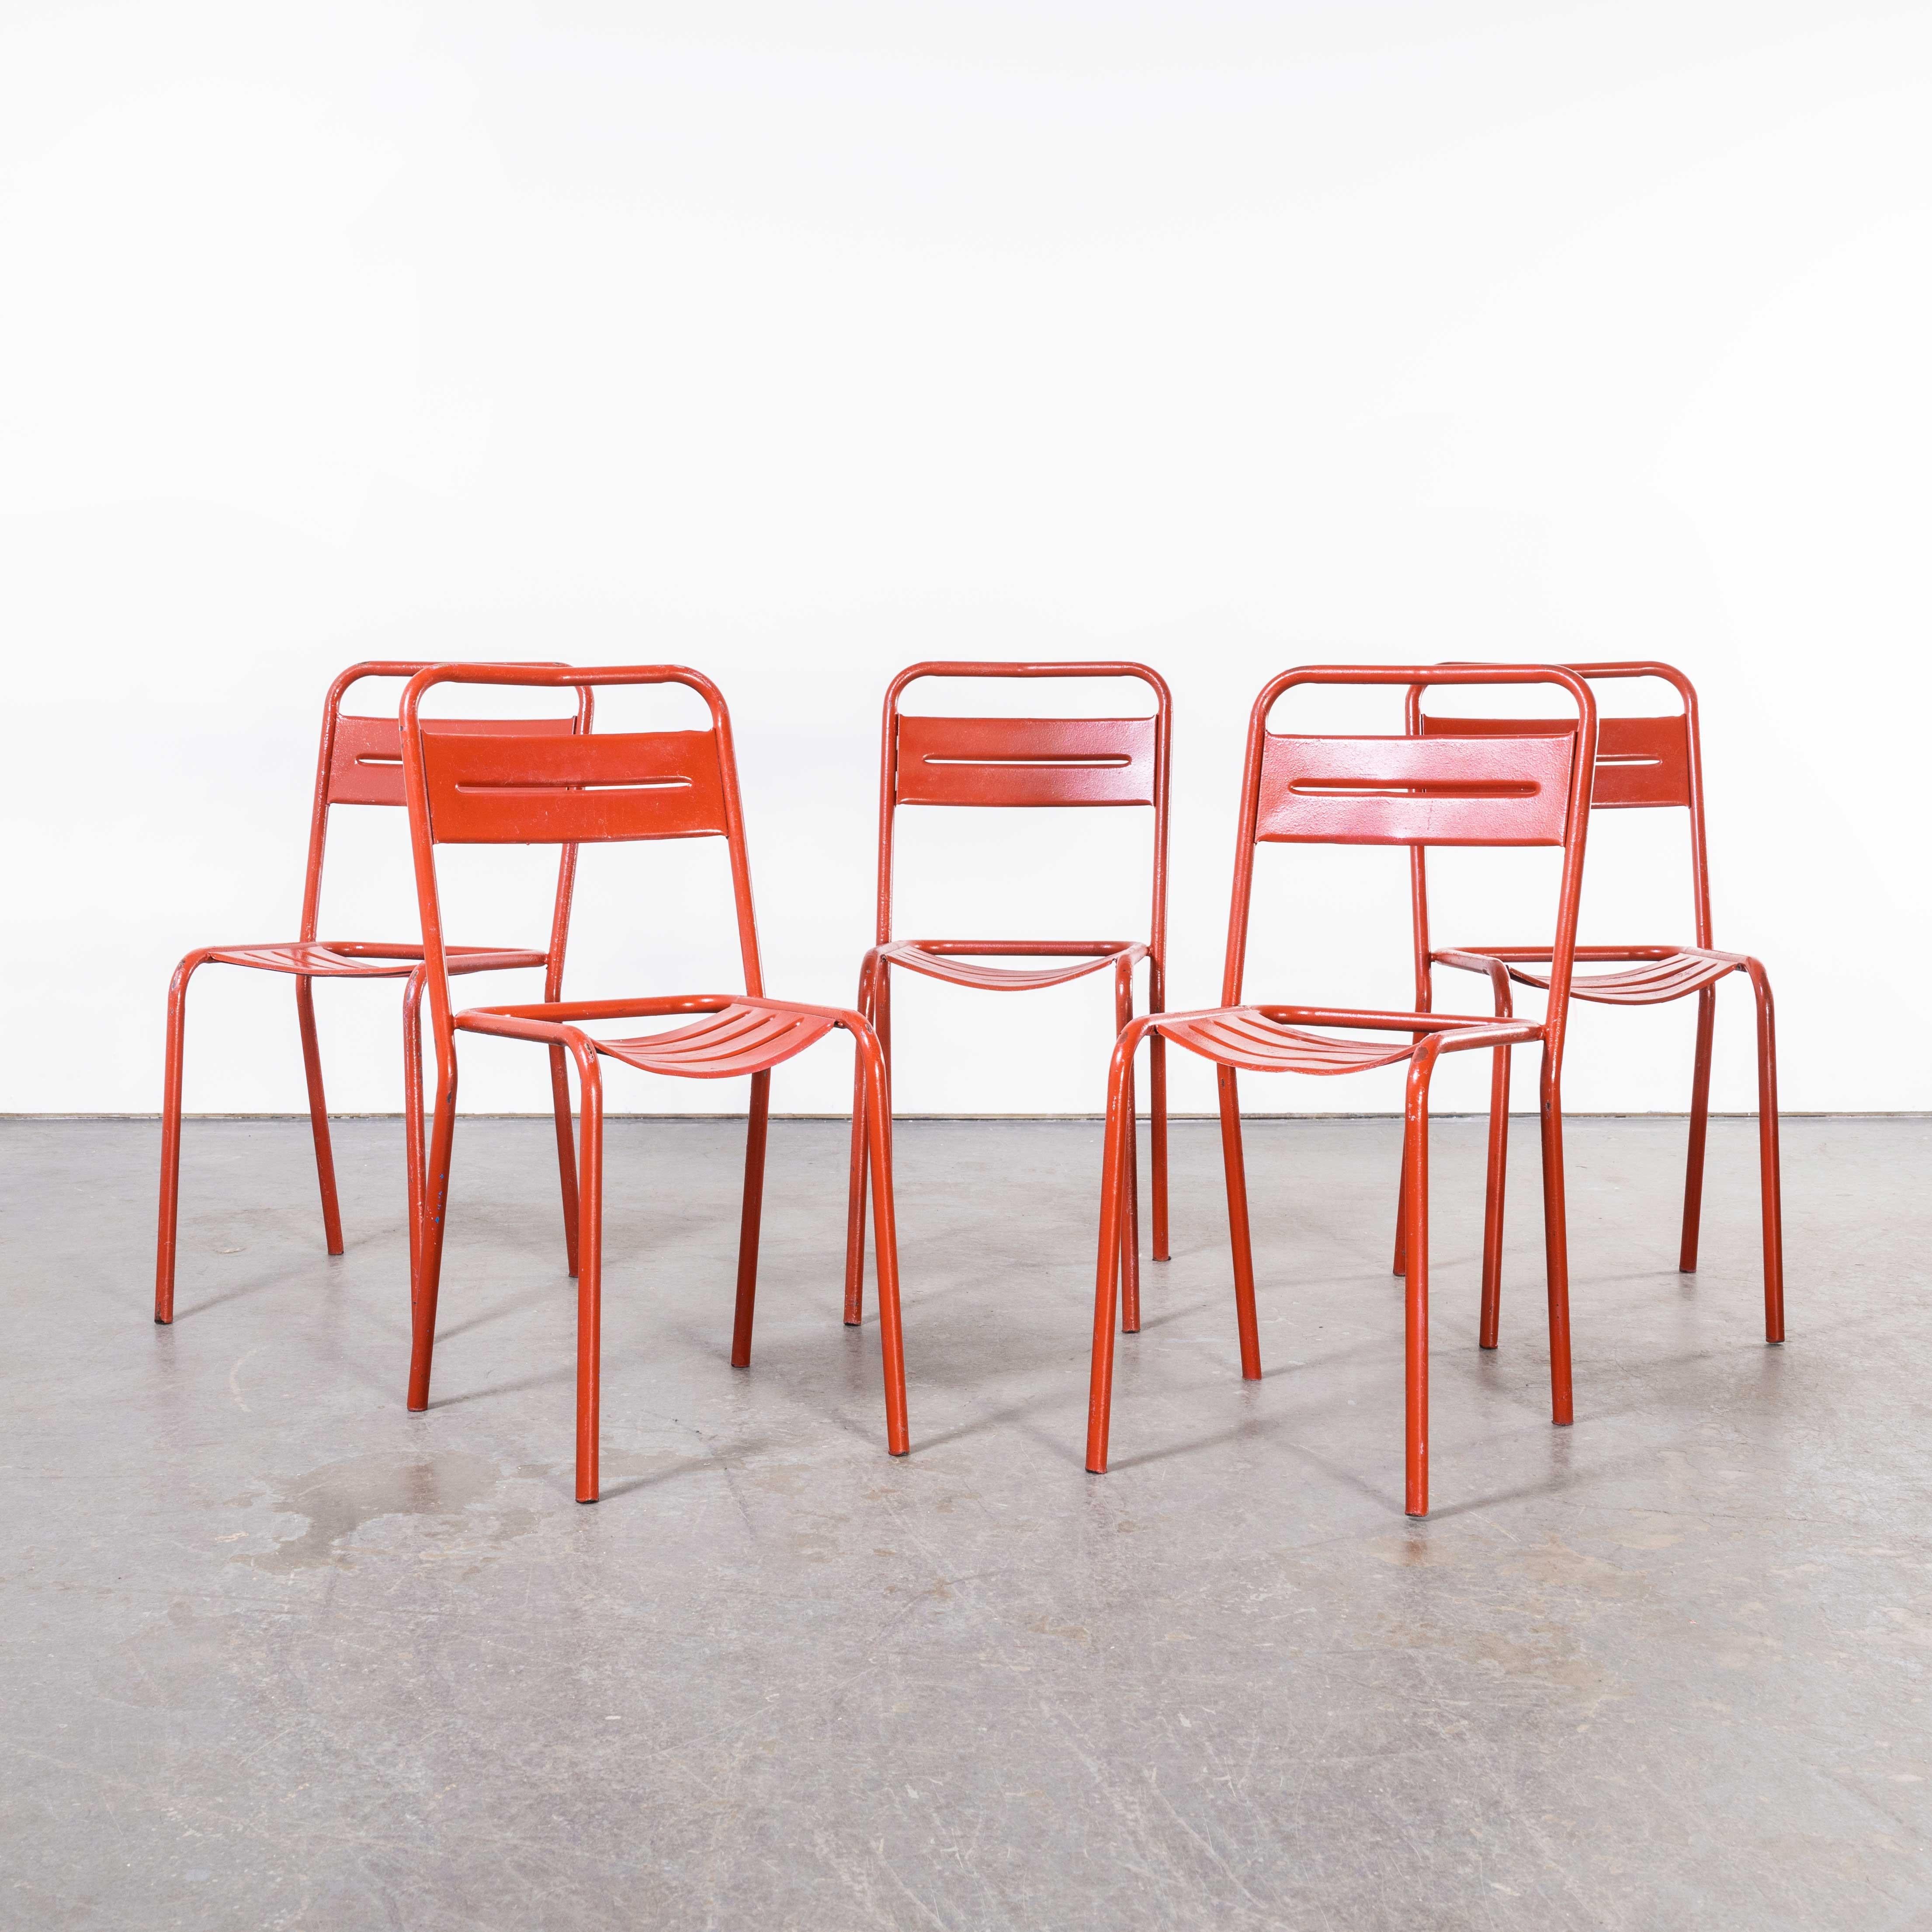 1950's French Red Metal Outdoor Dining Chairs, Set of Five For Sale 2